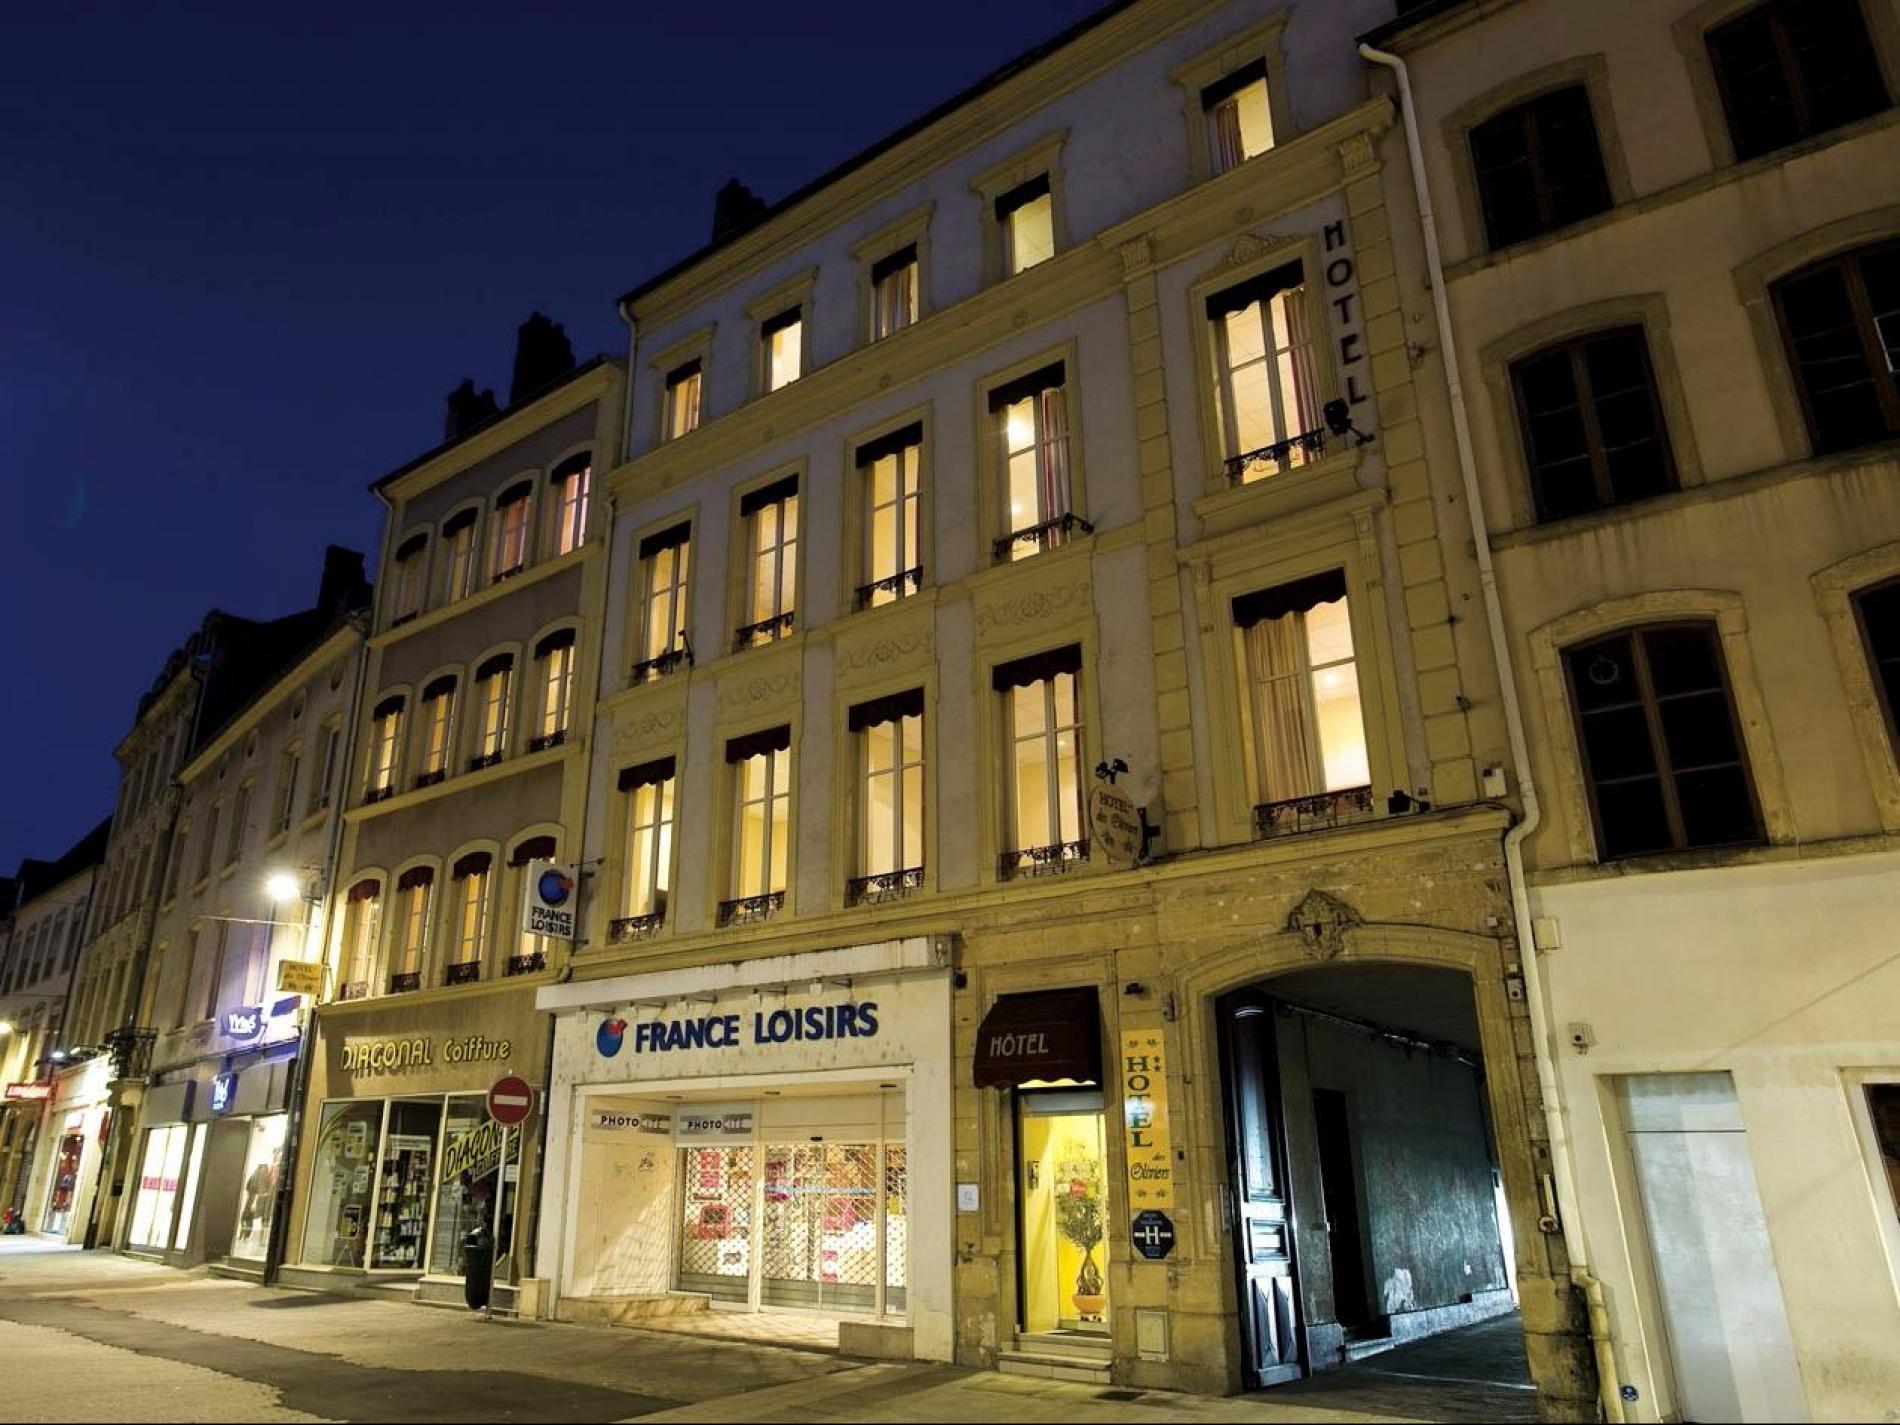 Logis Hotel ** in the historic center of Thionville